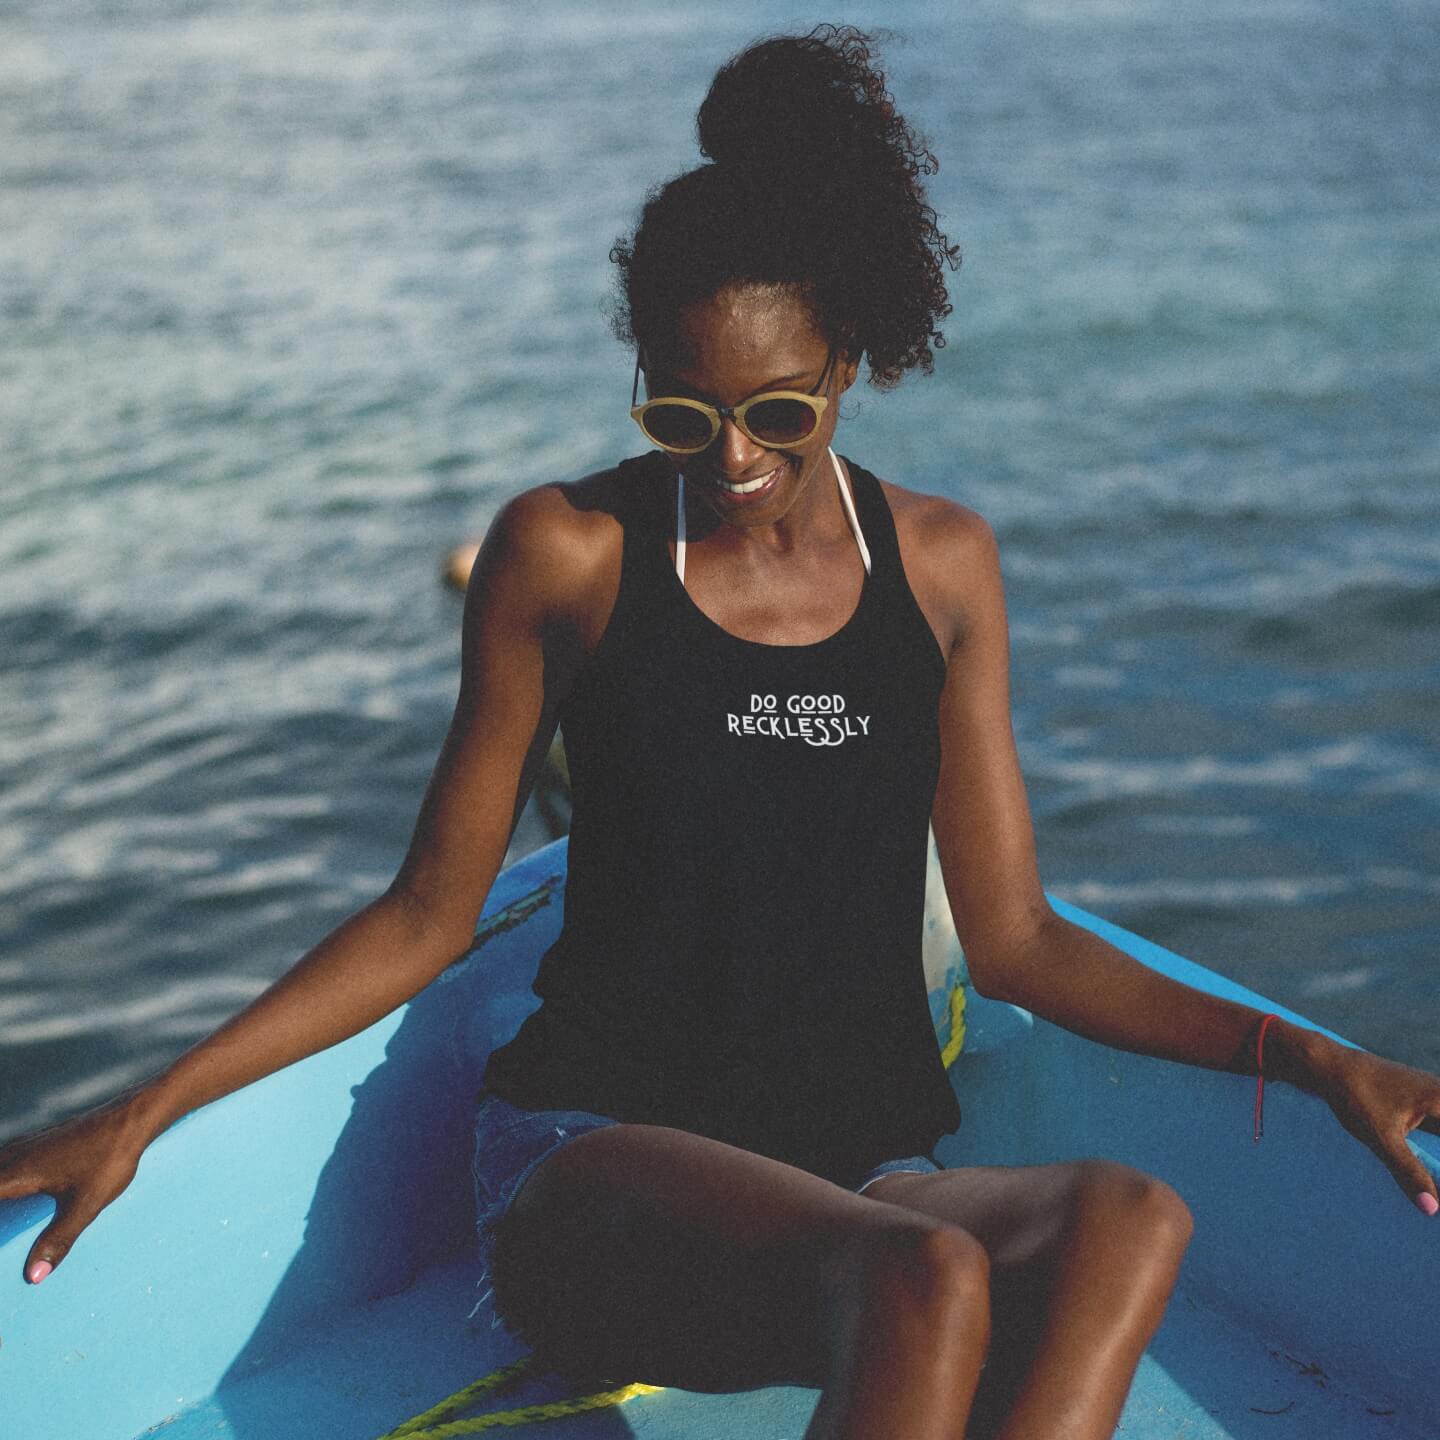 A Black woman with her hair in a high ponytail sits on a blue boat on the water wearing cutoff jean shorts and a black do good recklessly relaxed racerback tank.